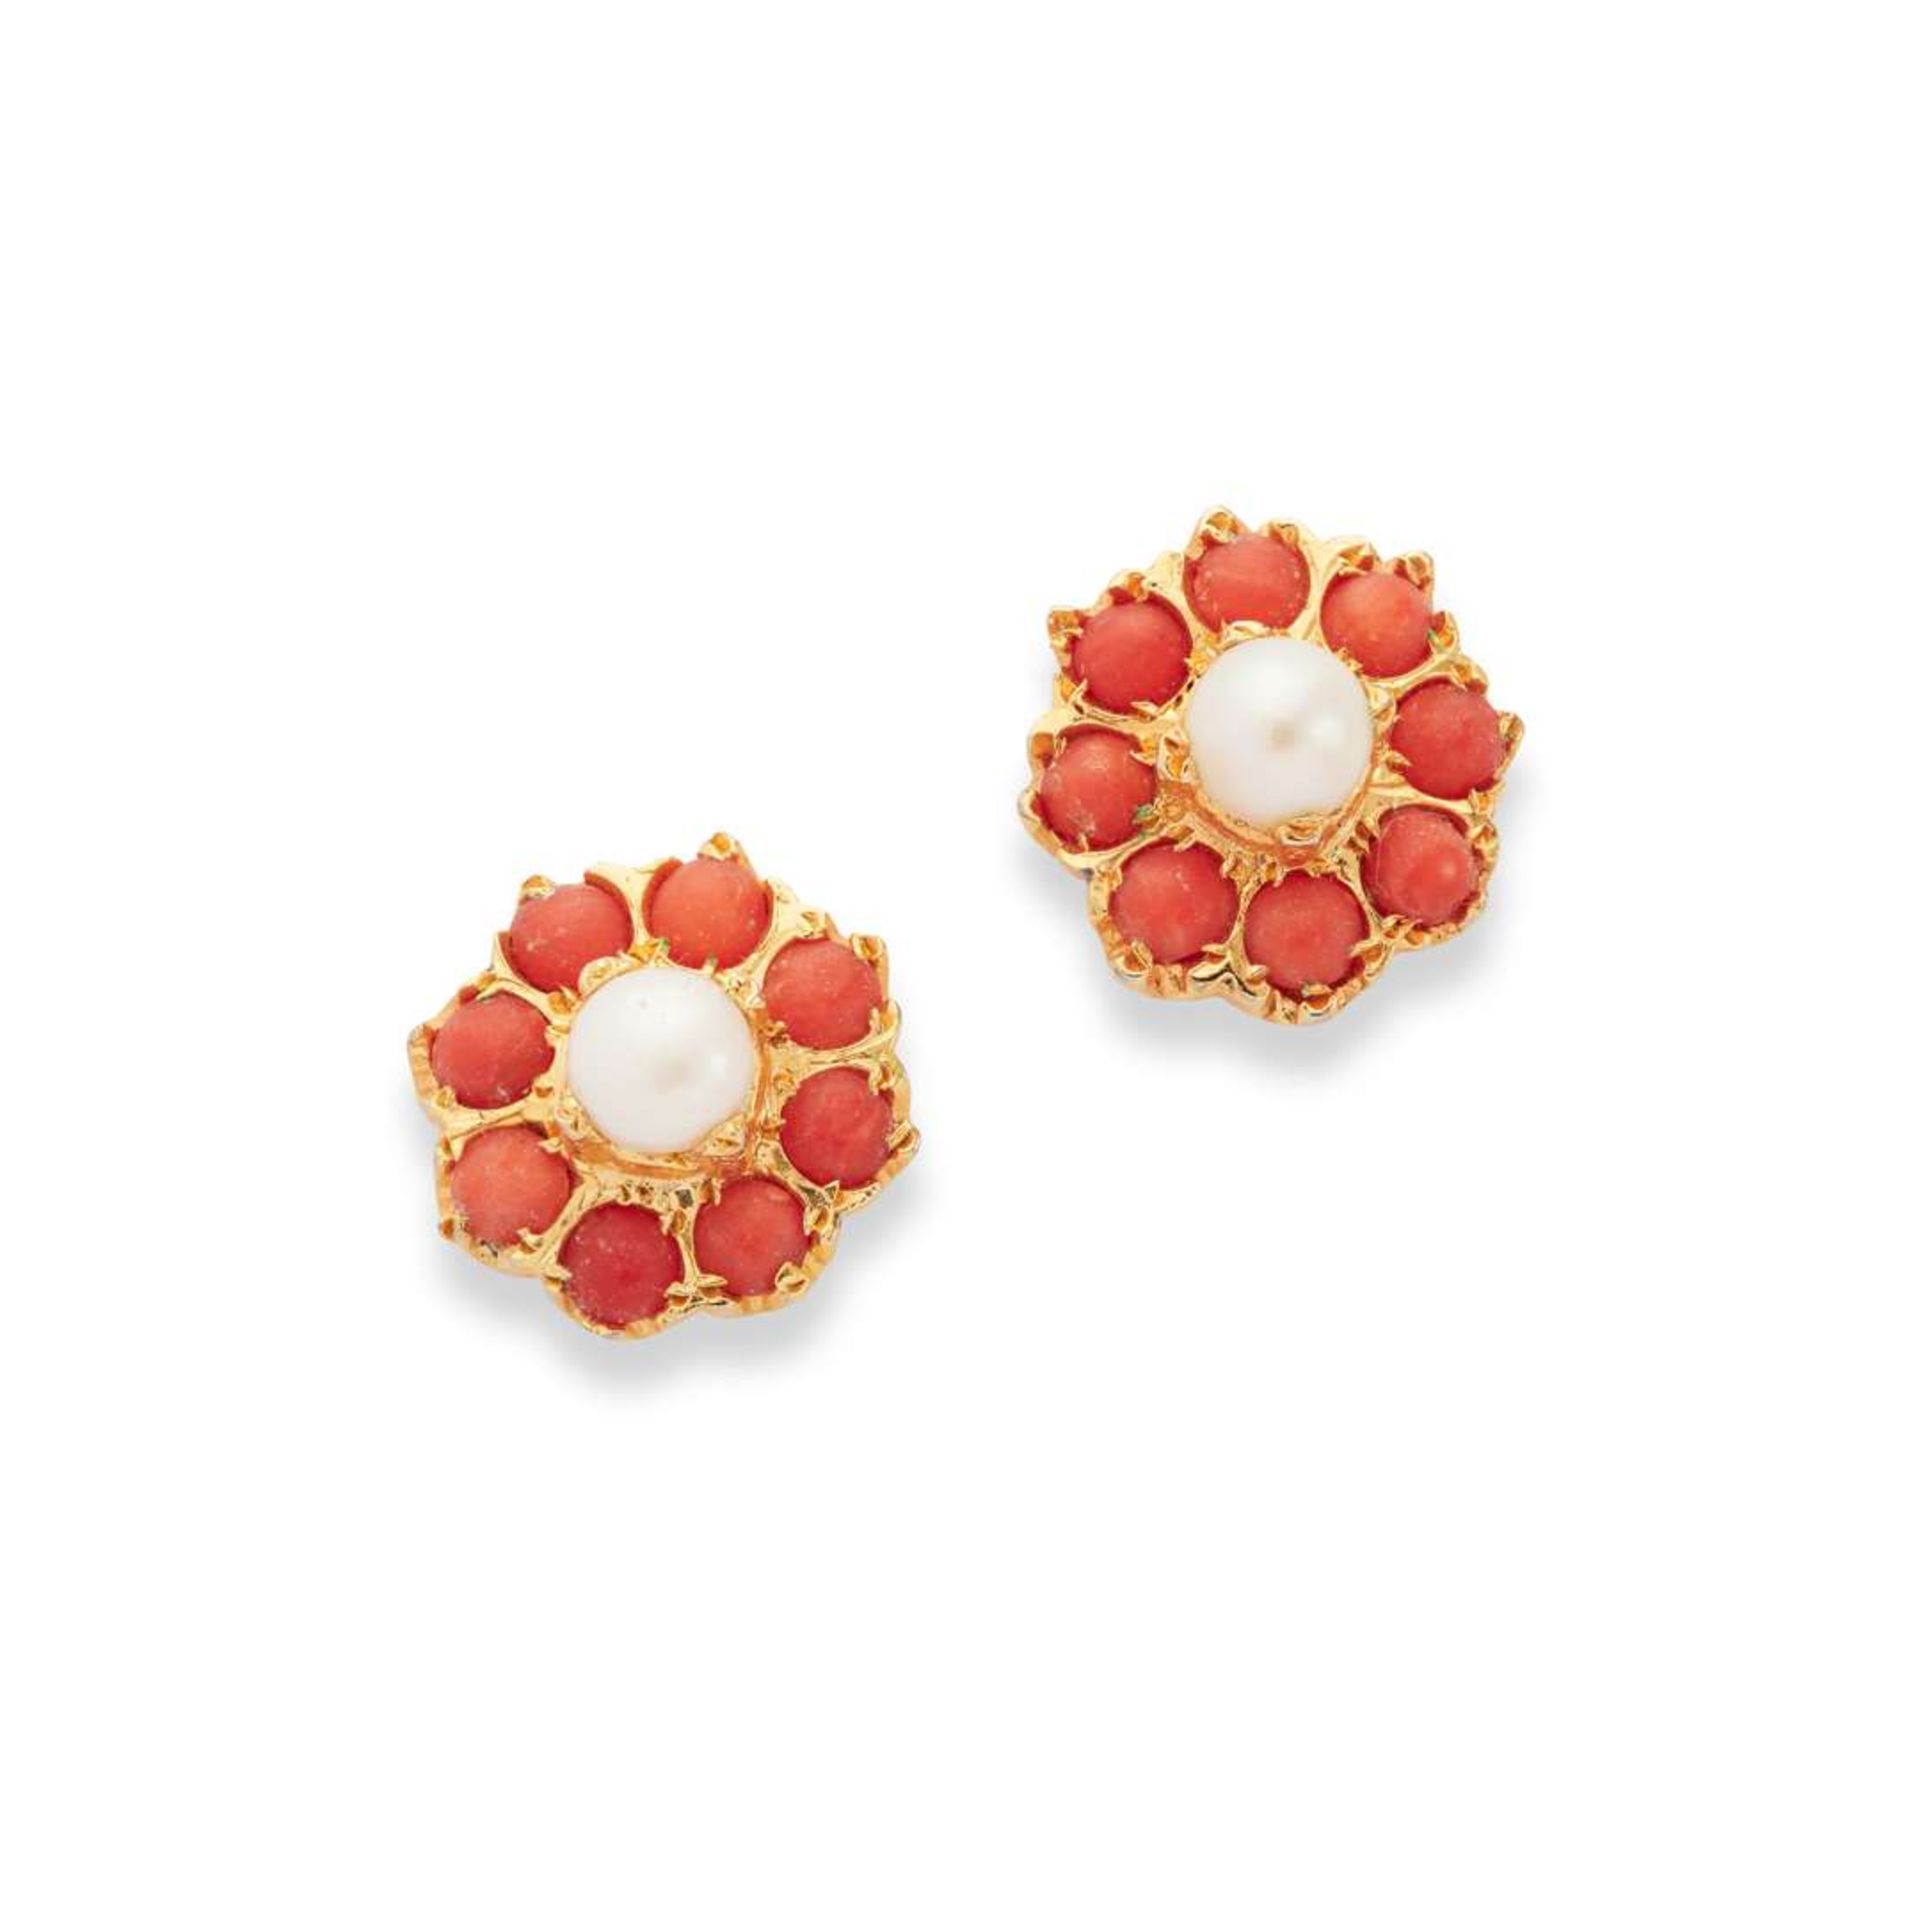 A pair of coral and pearl cluster earrings